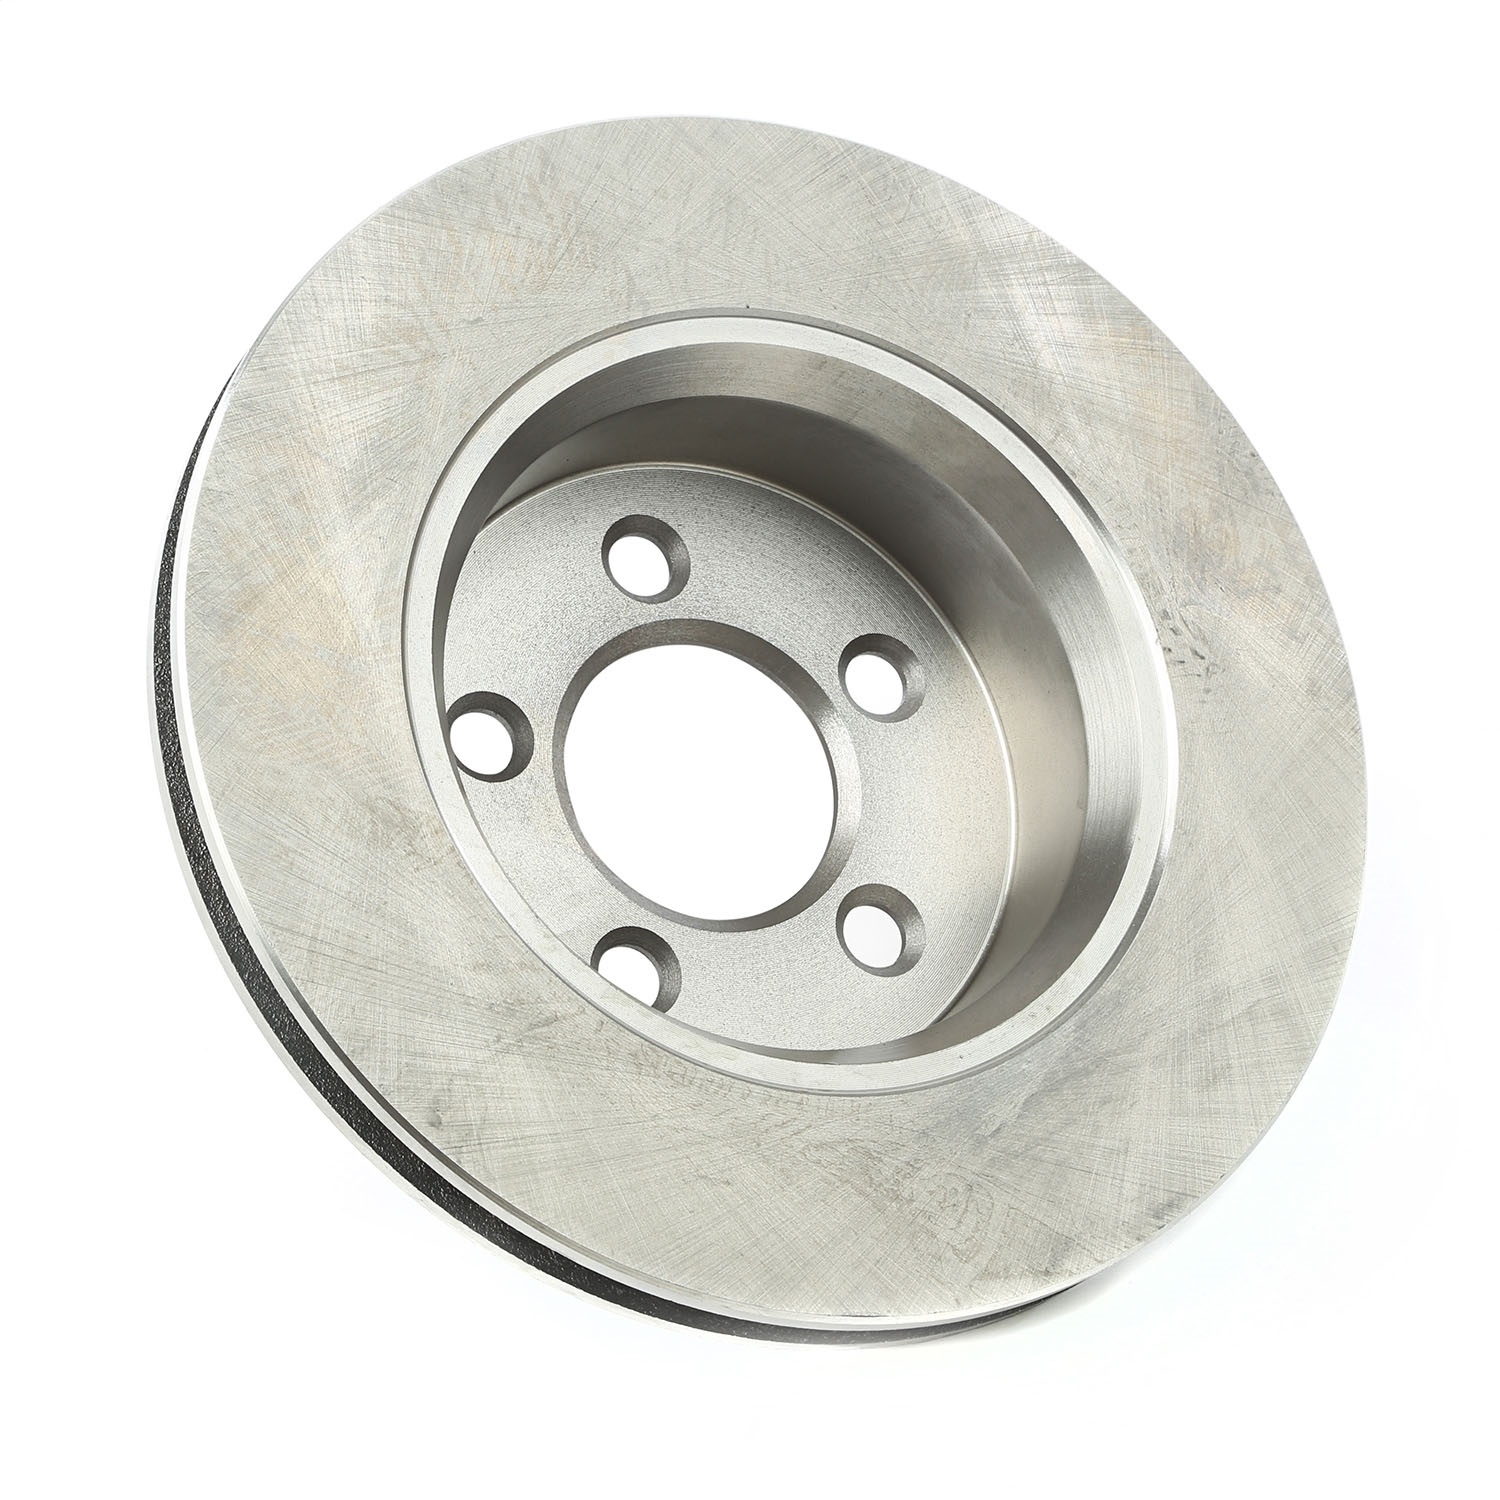 Omix This Replacement Front Disc Brake Rotor From Omix Fits 08-12 Jeep Liberty. Right Or Left